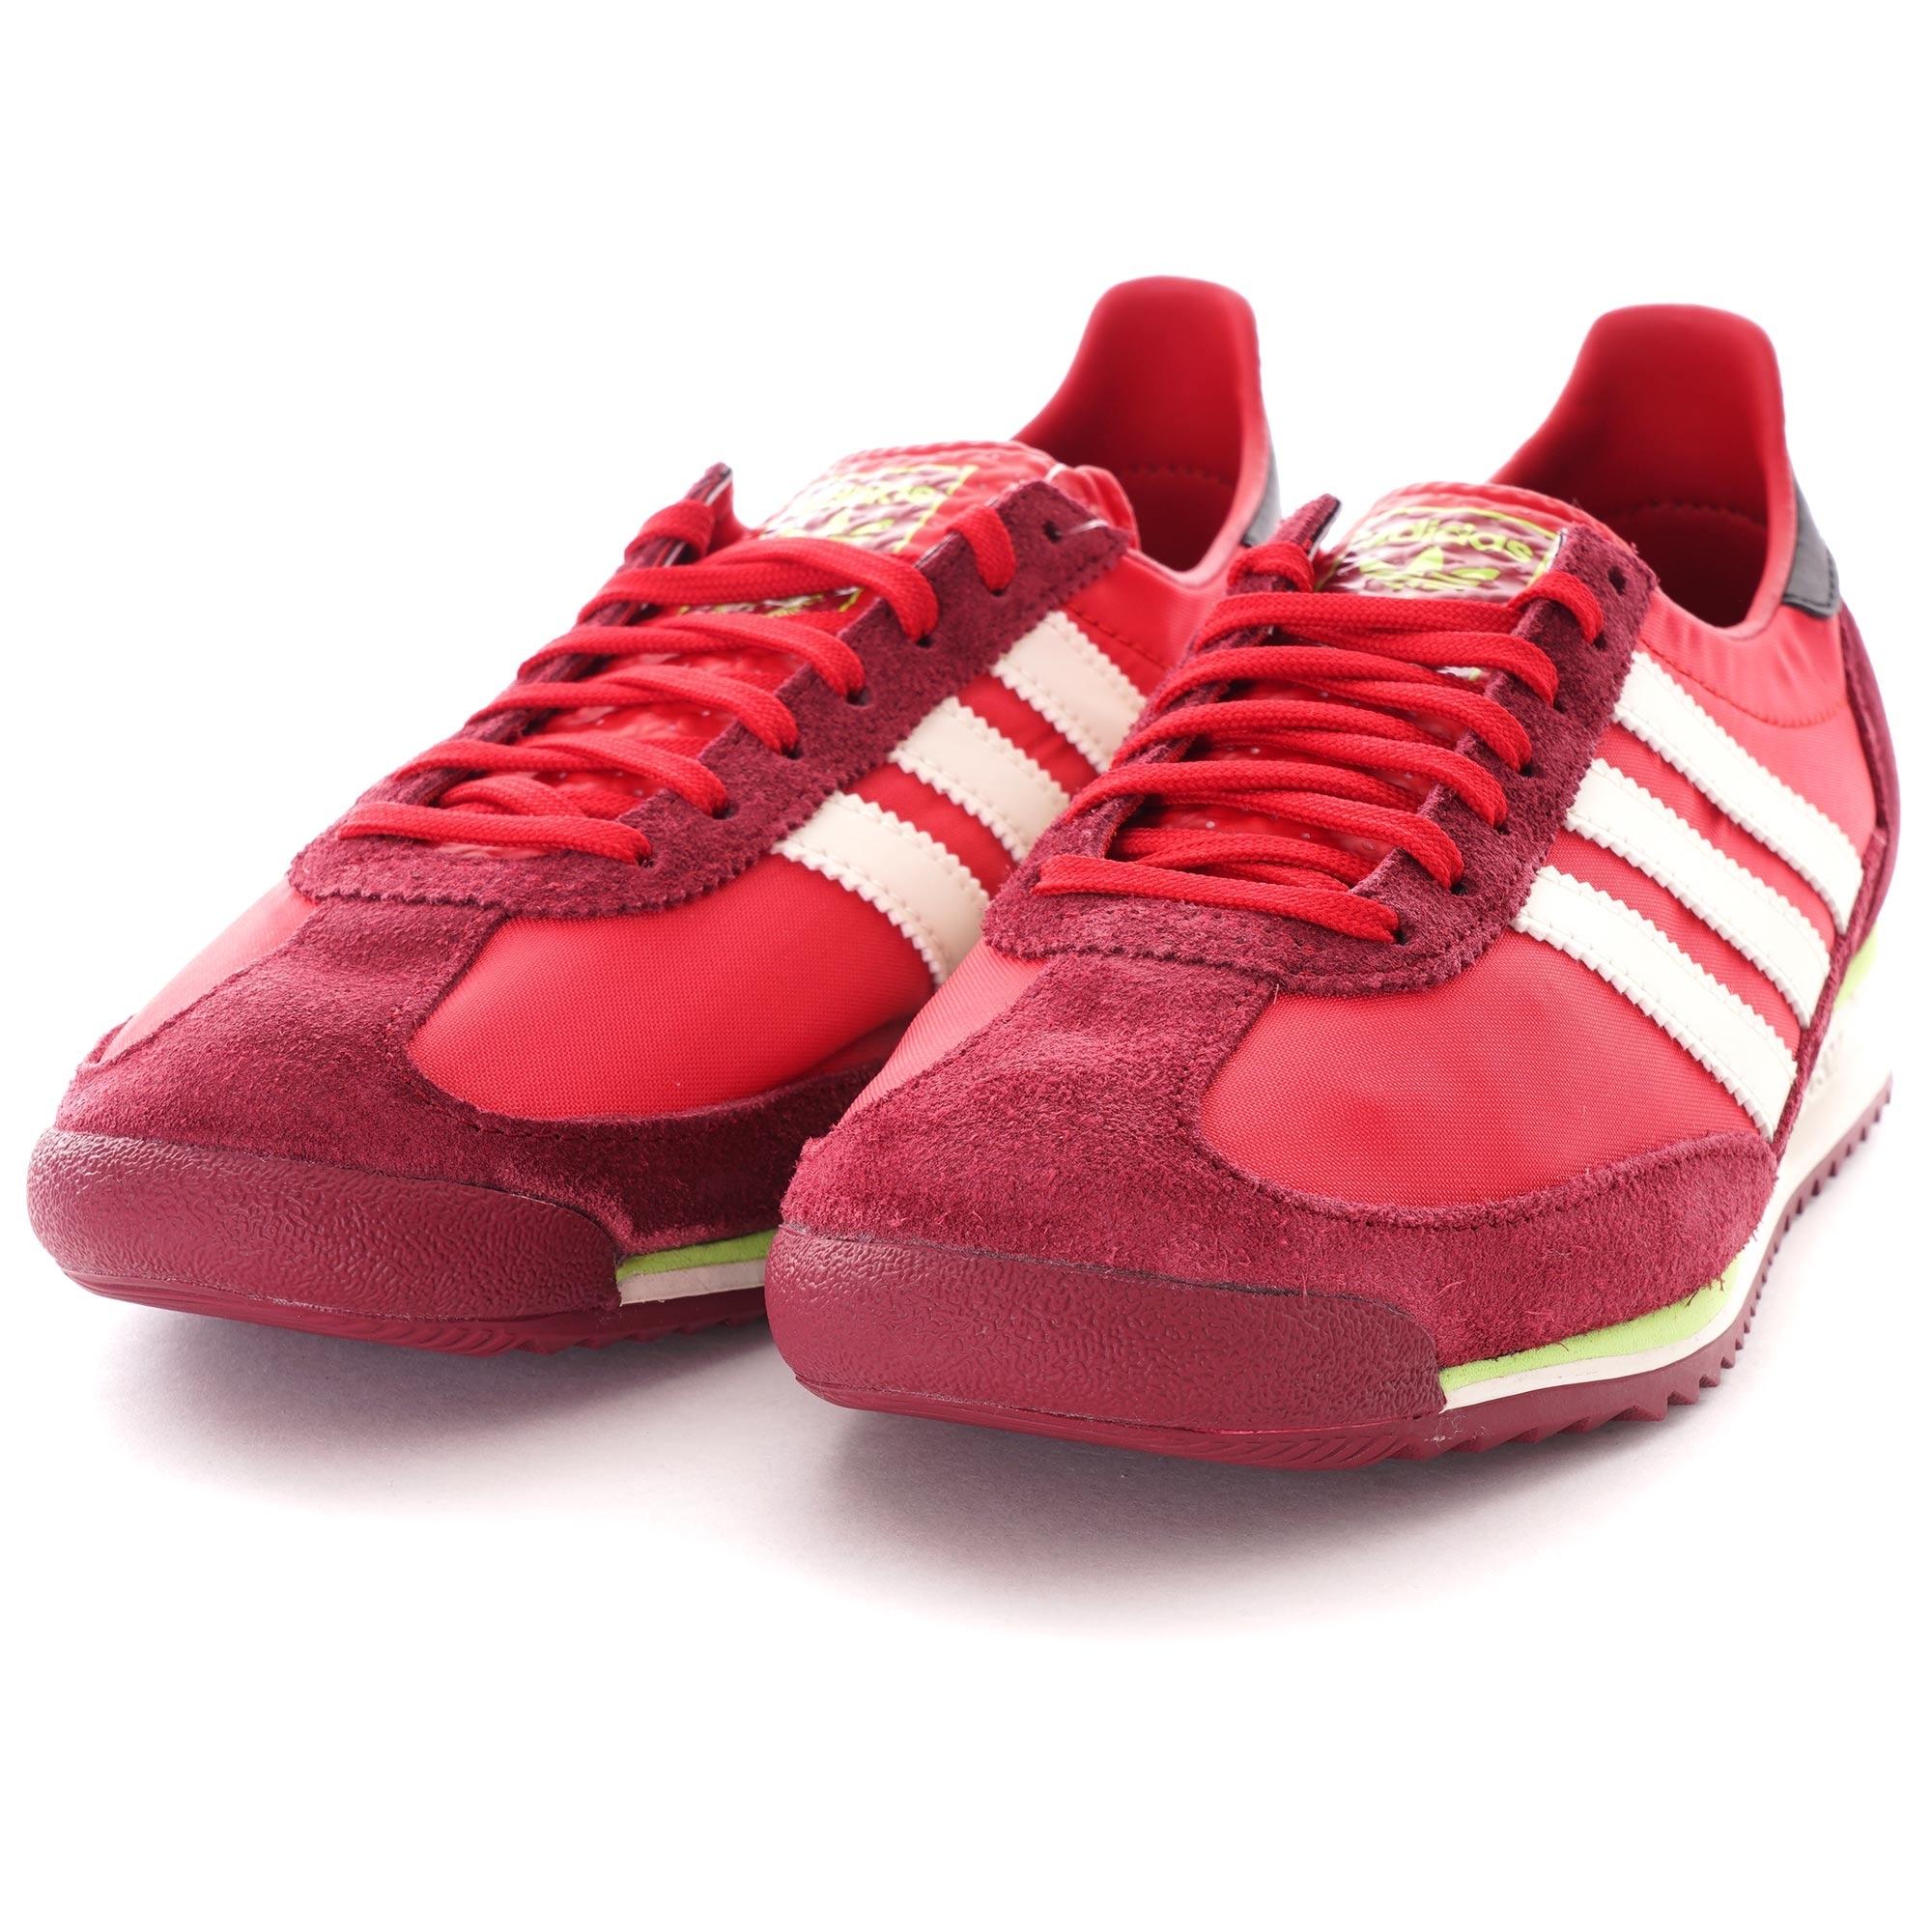 adidas Originals Synthetic Sl 72 Trainers in Scarlet Red (Red) for Men -  Lyst